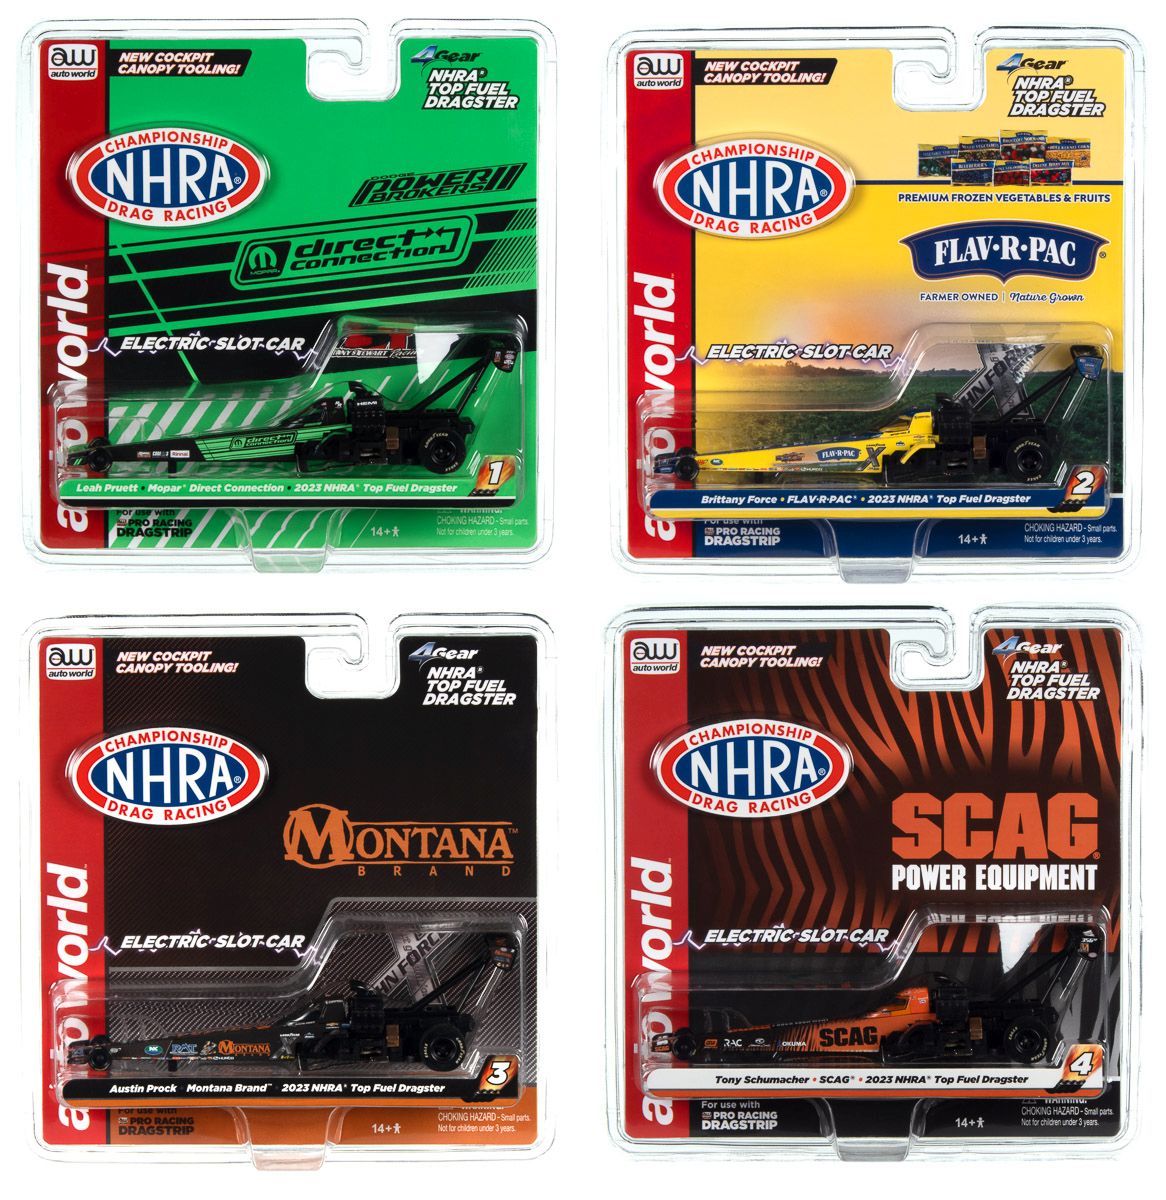 NHRA Top Fuel Dragsters – 4 GearBrittany Force – 2023 FLAV-R Auto World SC398 Each car is sold separately